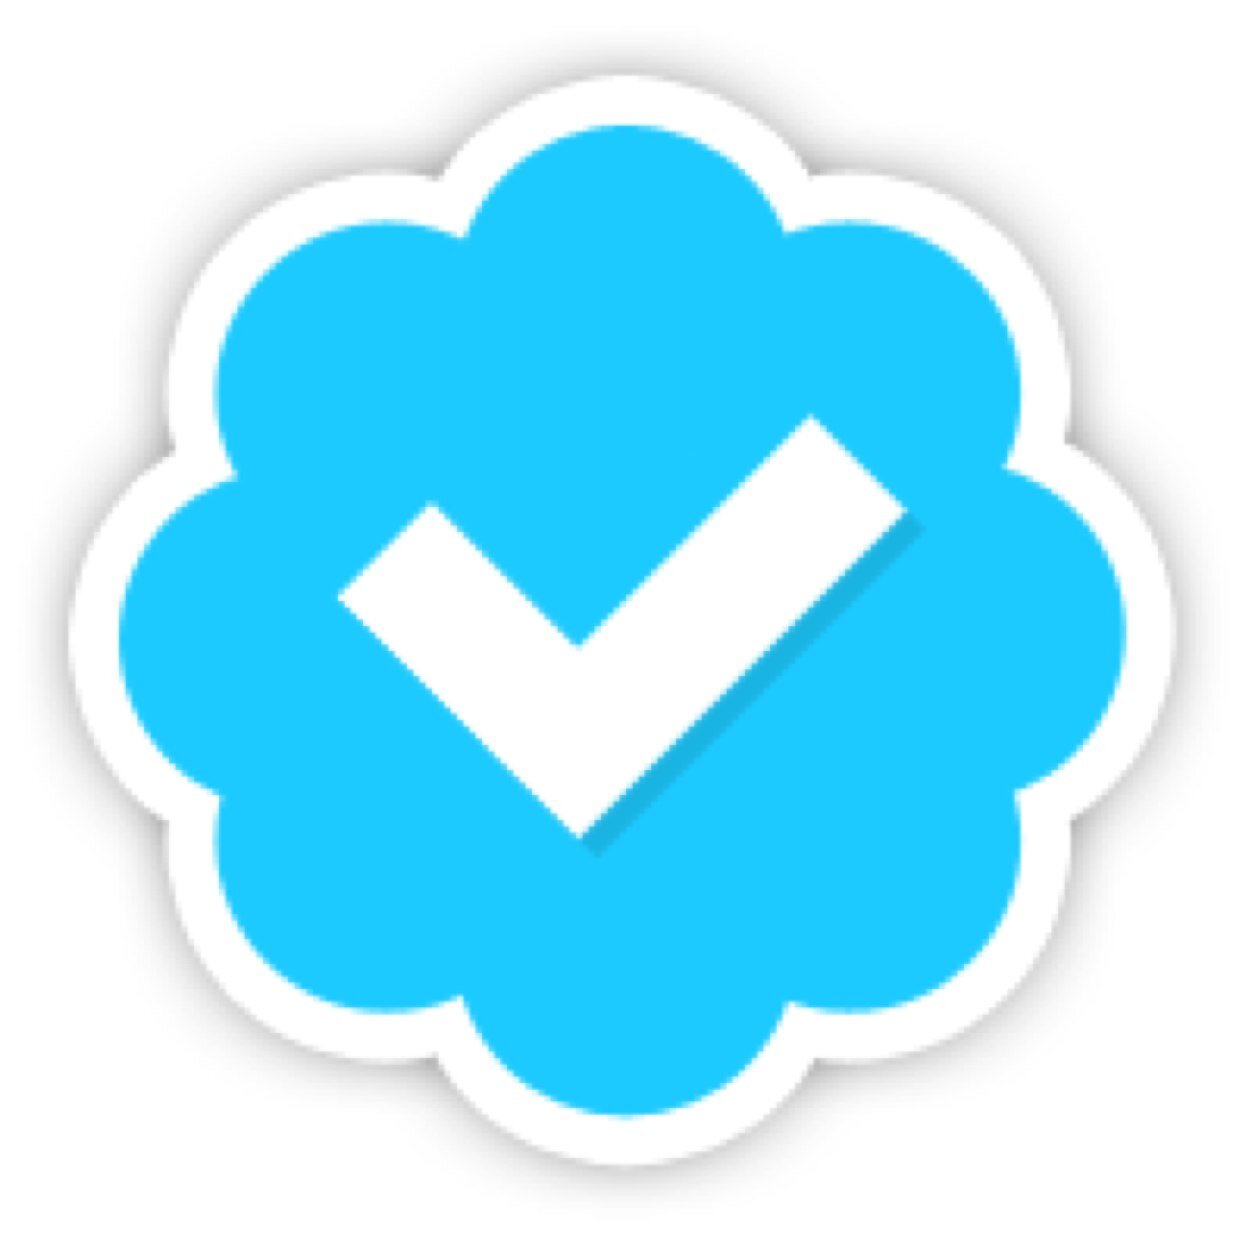 This is the new backup account for @verified